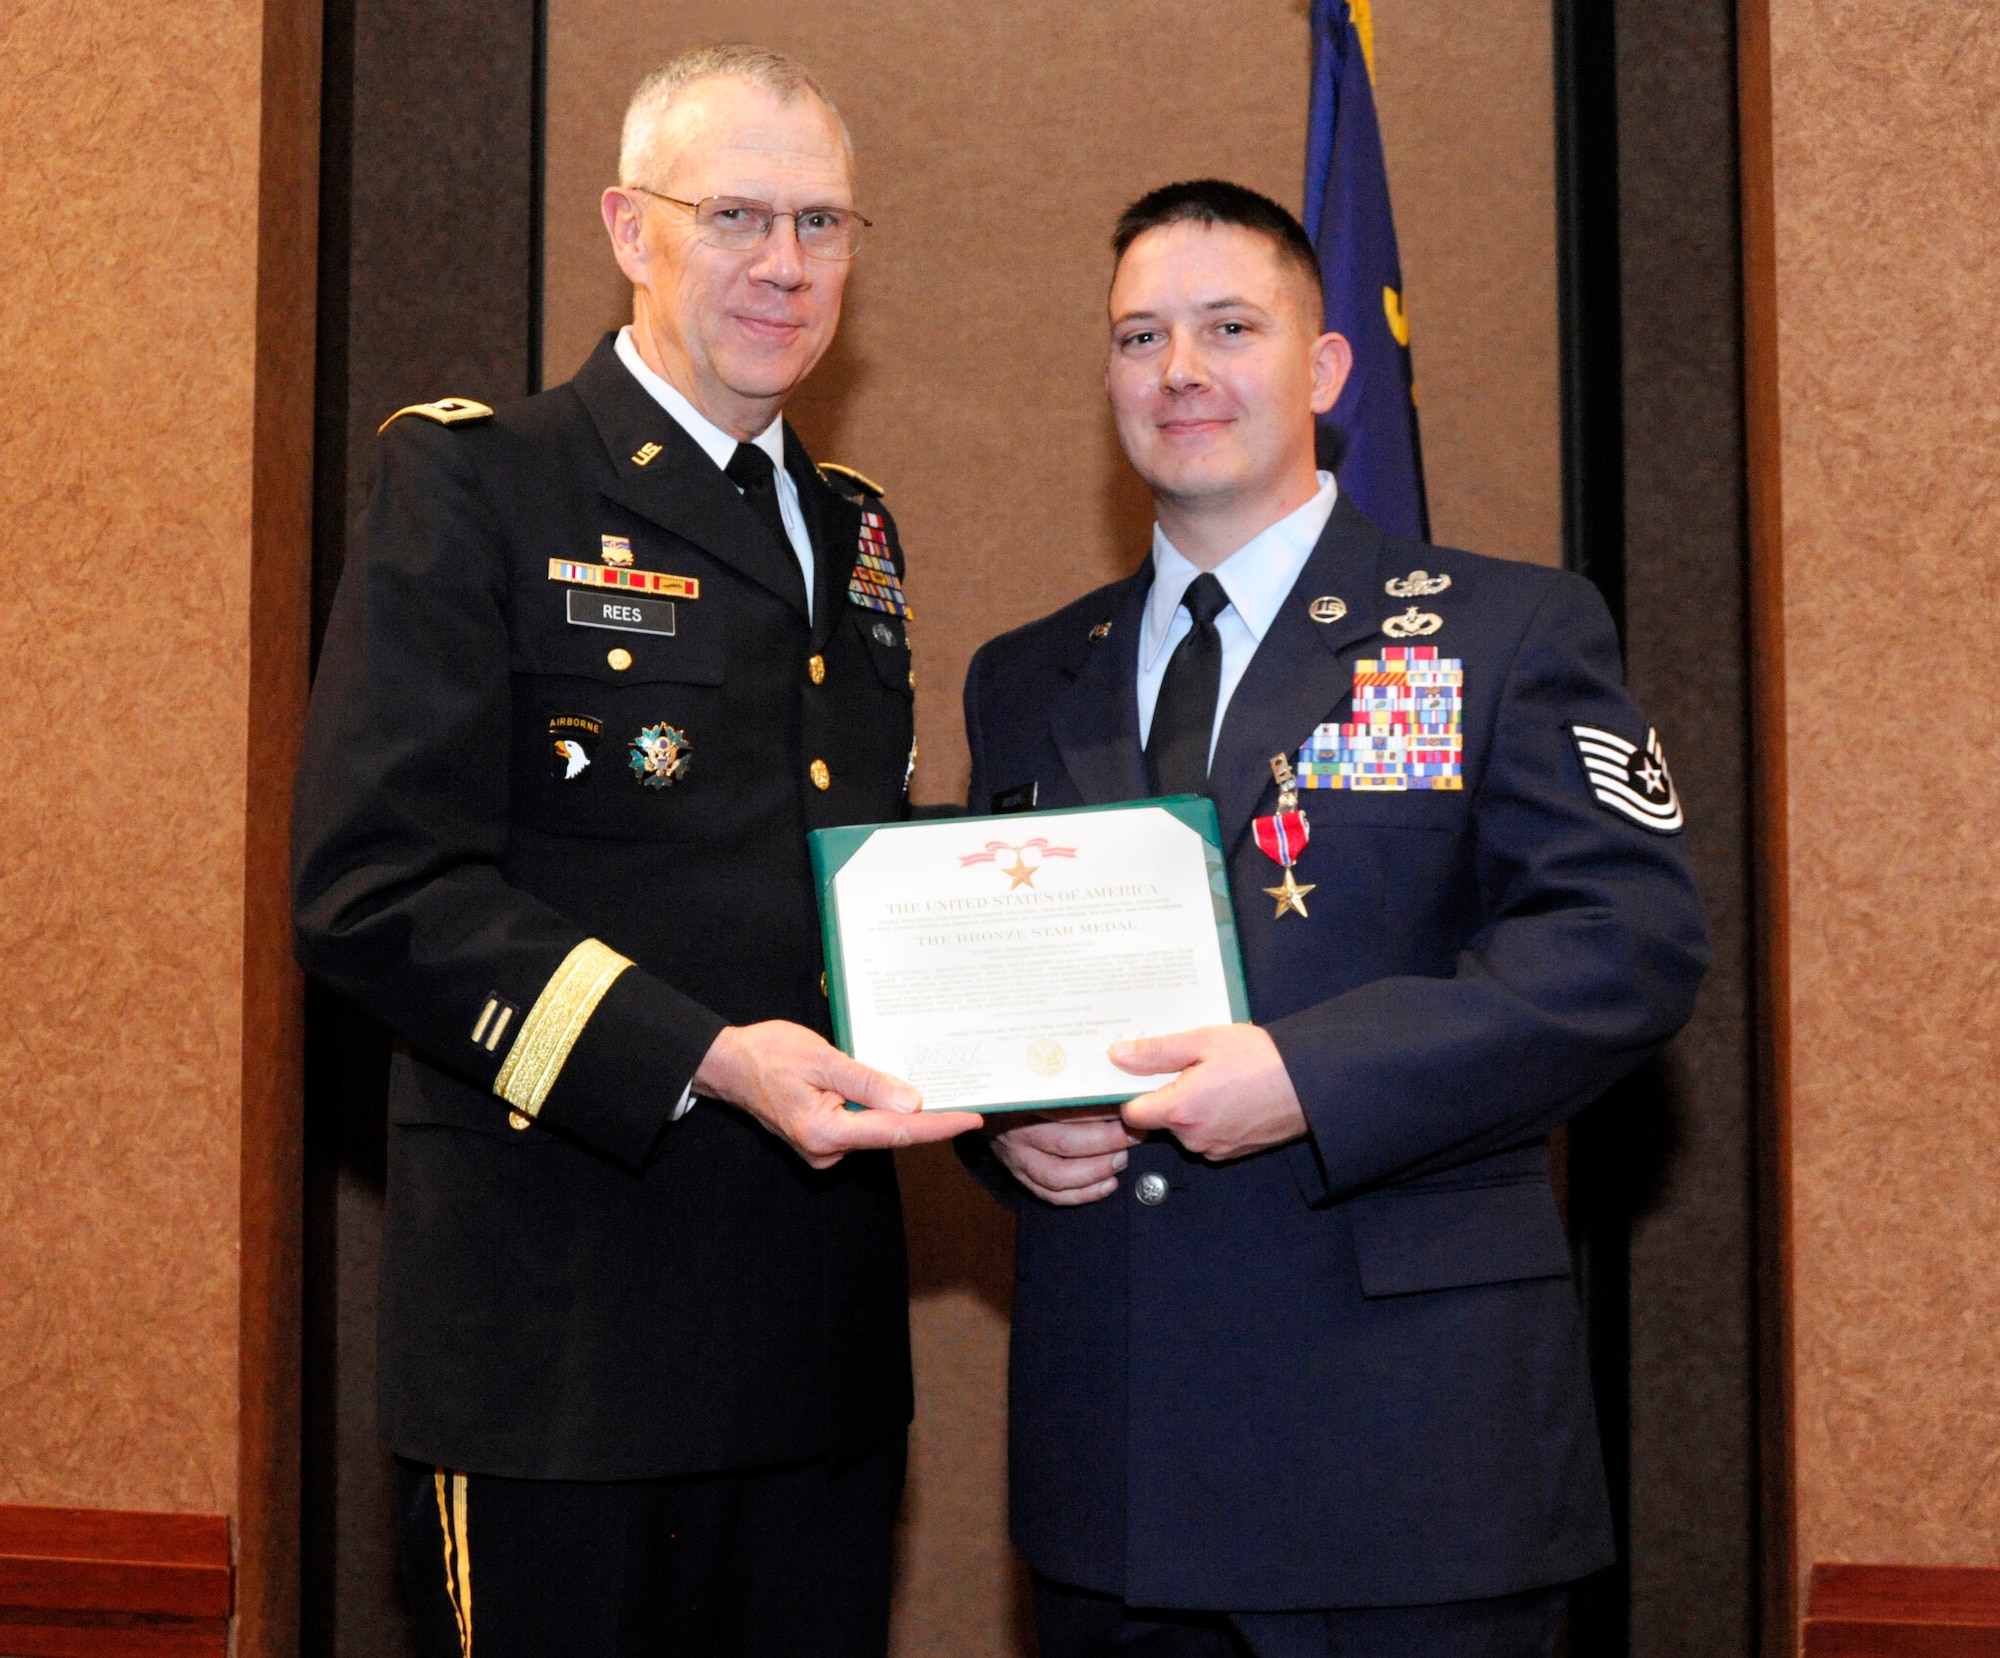 Maj. Gen. Raymond Rees, Adjutant General for the State of Oregon, presents the Bronze Star Medal and certificate to Tech. Sgt. Mendell "Trey" Holley, Feb. 27, 2010, at the Oregon Air National Guard Awards Banquet, Portland, Ore. (stock photo by Tech. Sgt. Greg Neuleib (ret.) 142nd Fighter Wing Public Affairs Department) 


